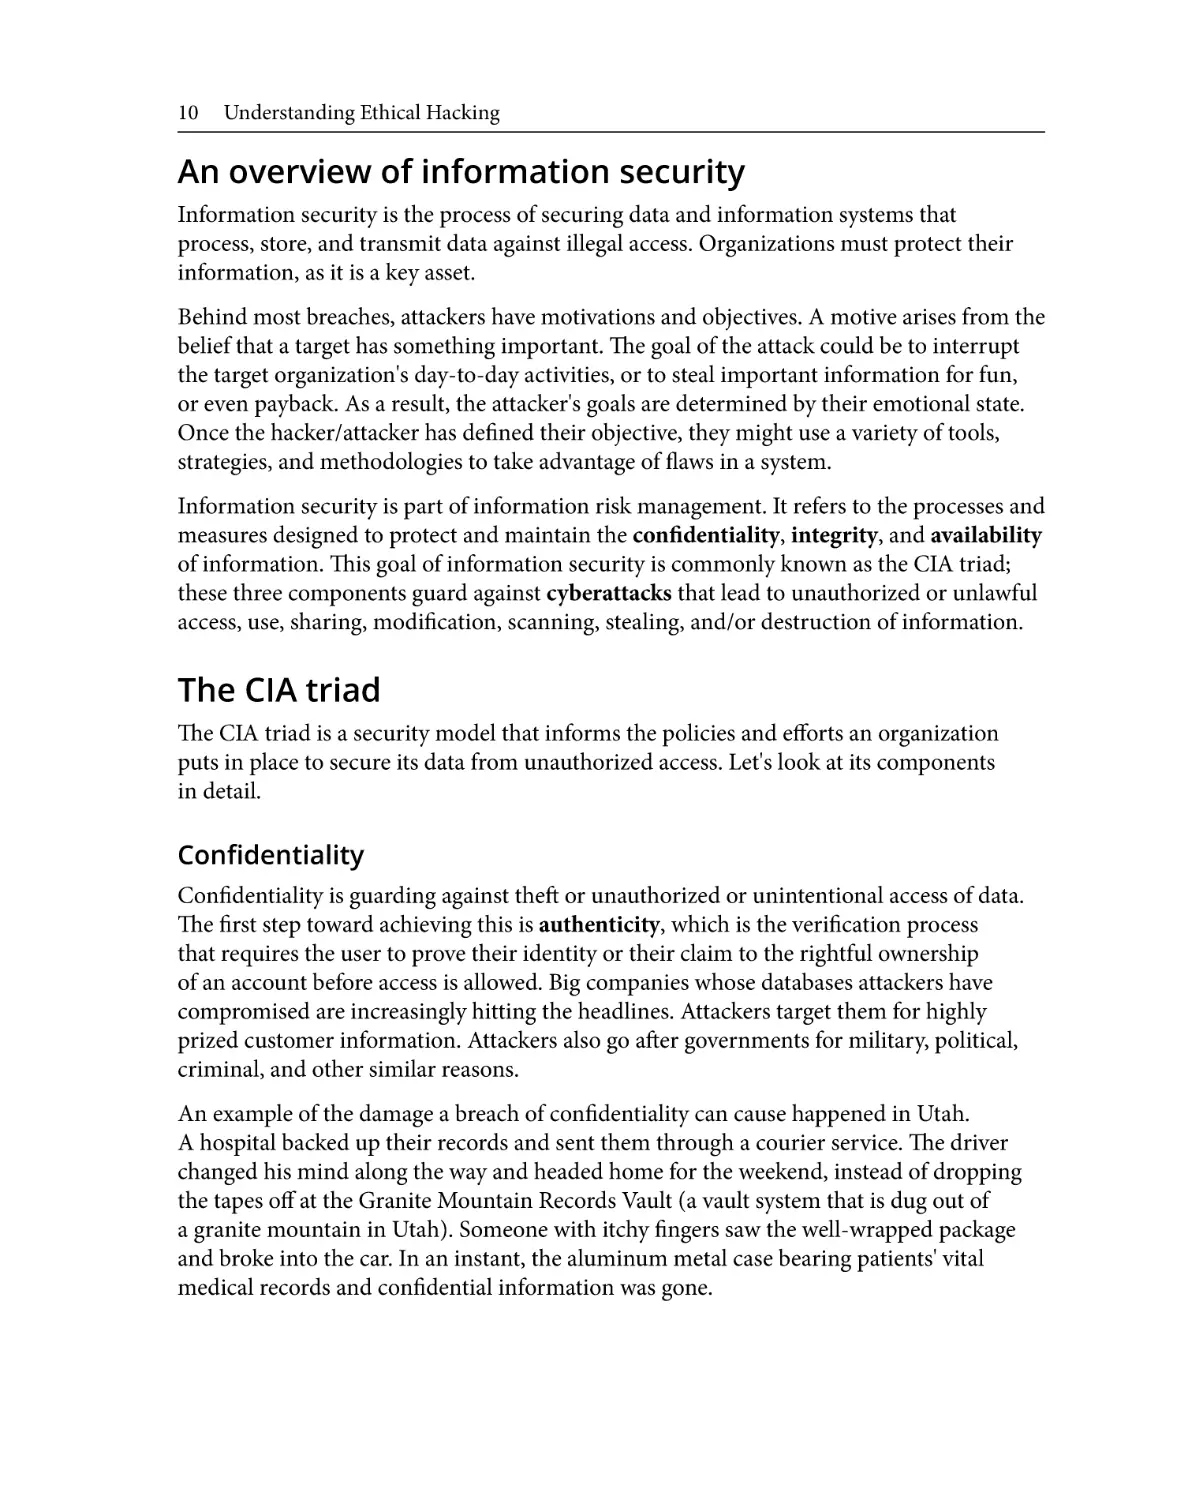 An overview of information security
The CIA triad